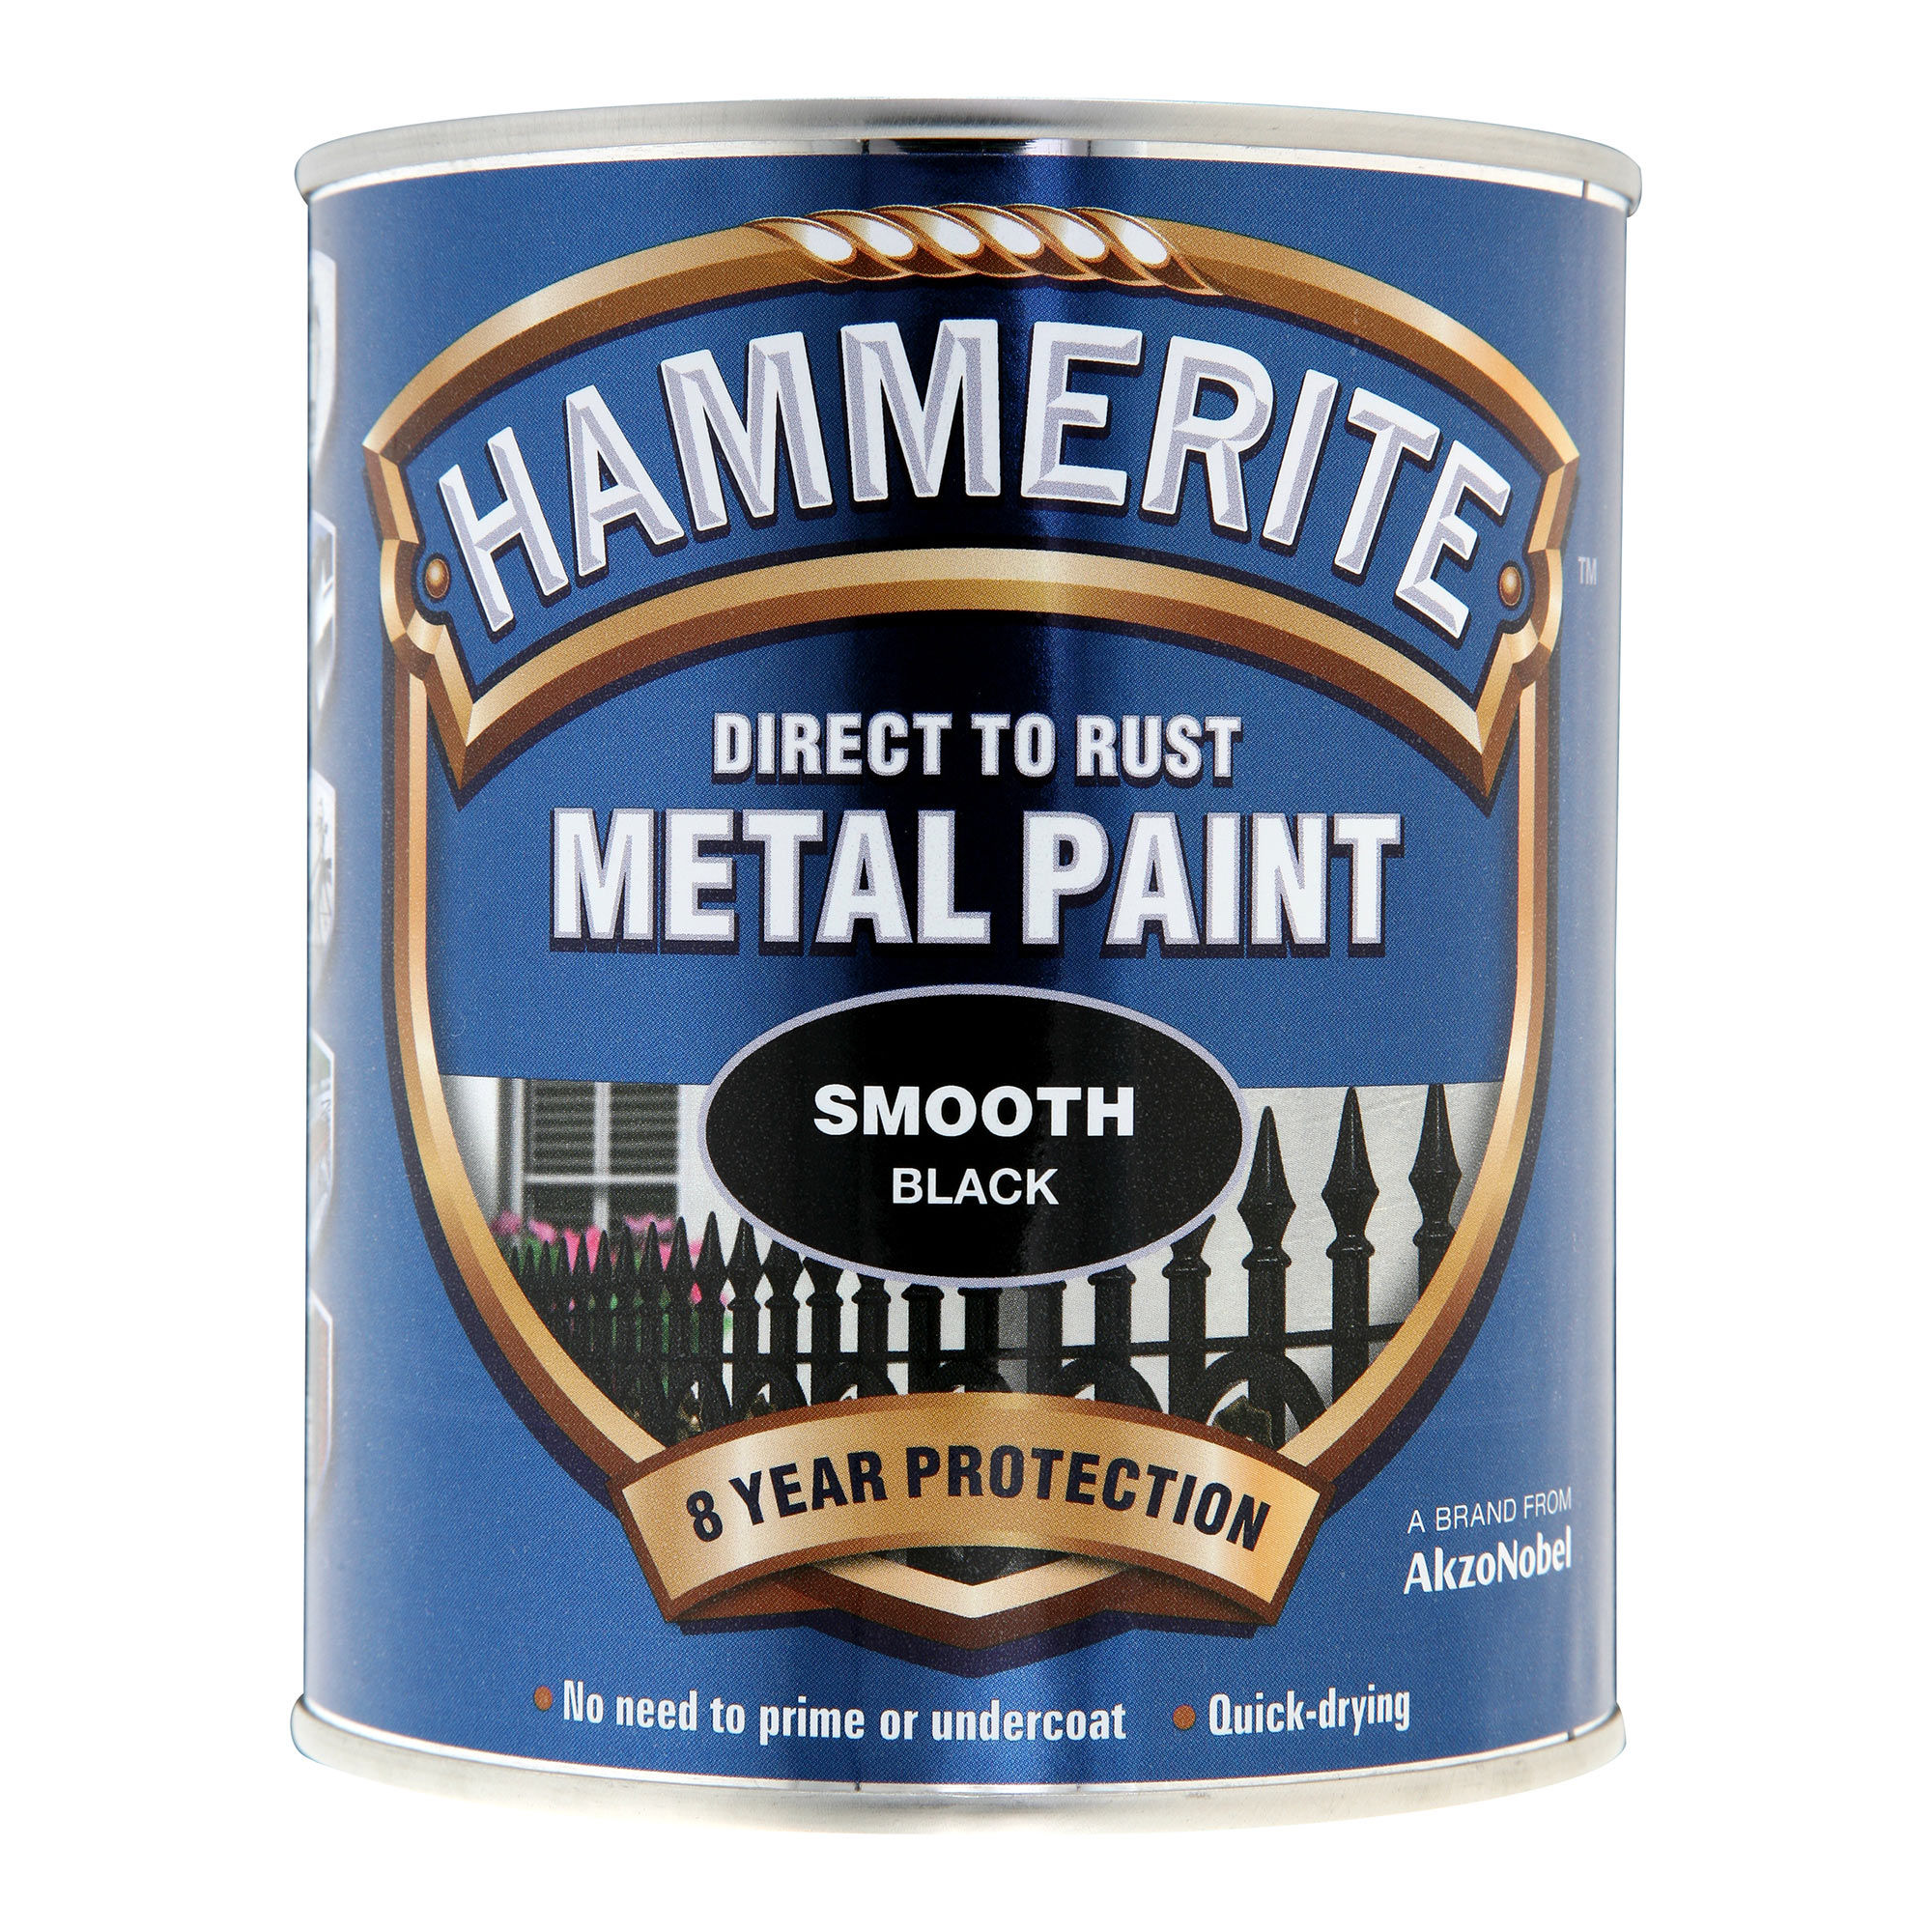 Hammerite Direct to Rust Metal Paint Smooth Finish Black